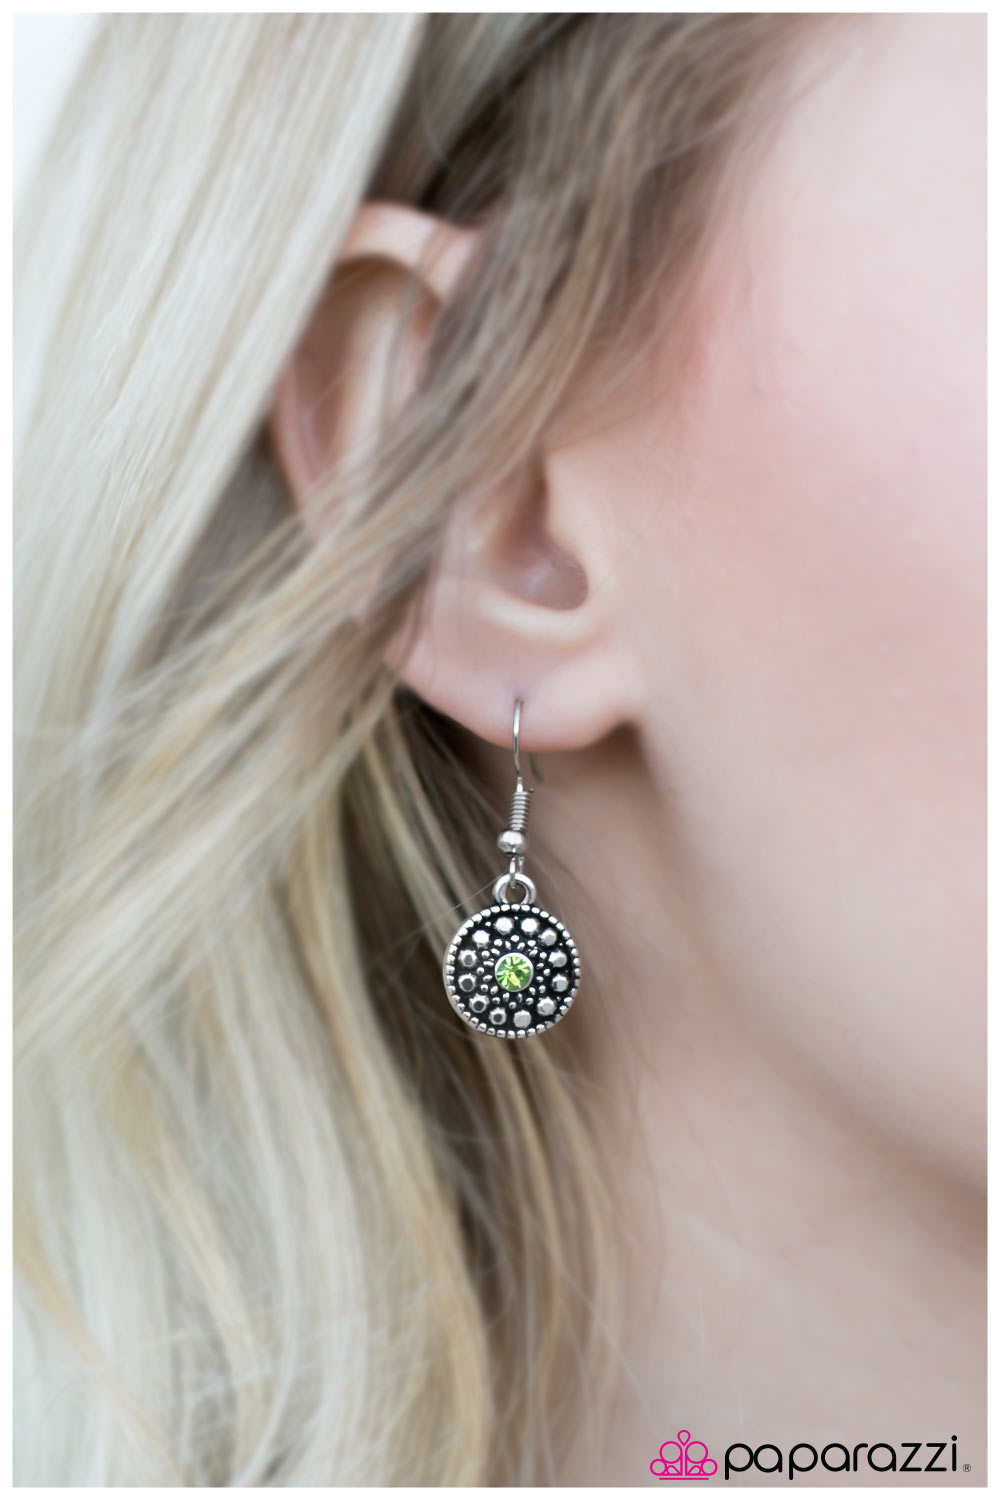 A Simpler Time - Paparazzi earrings